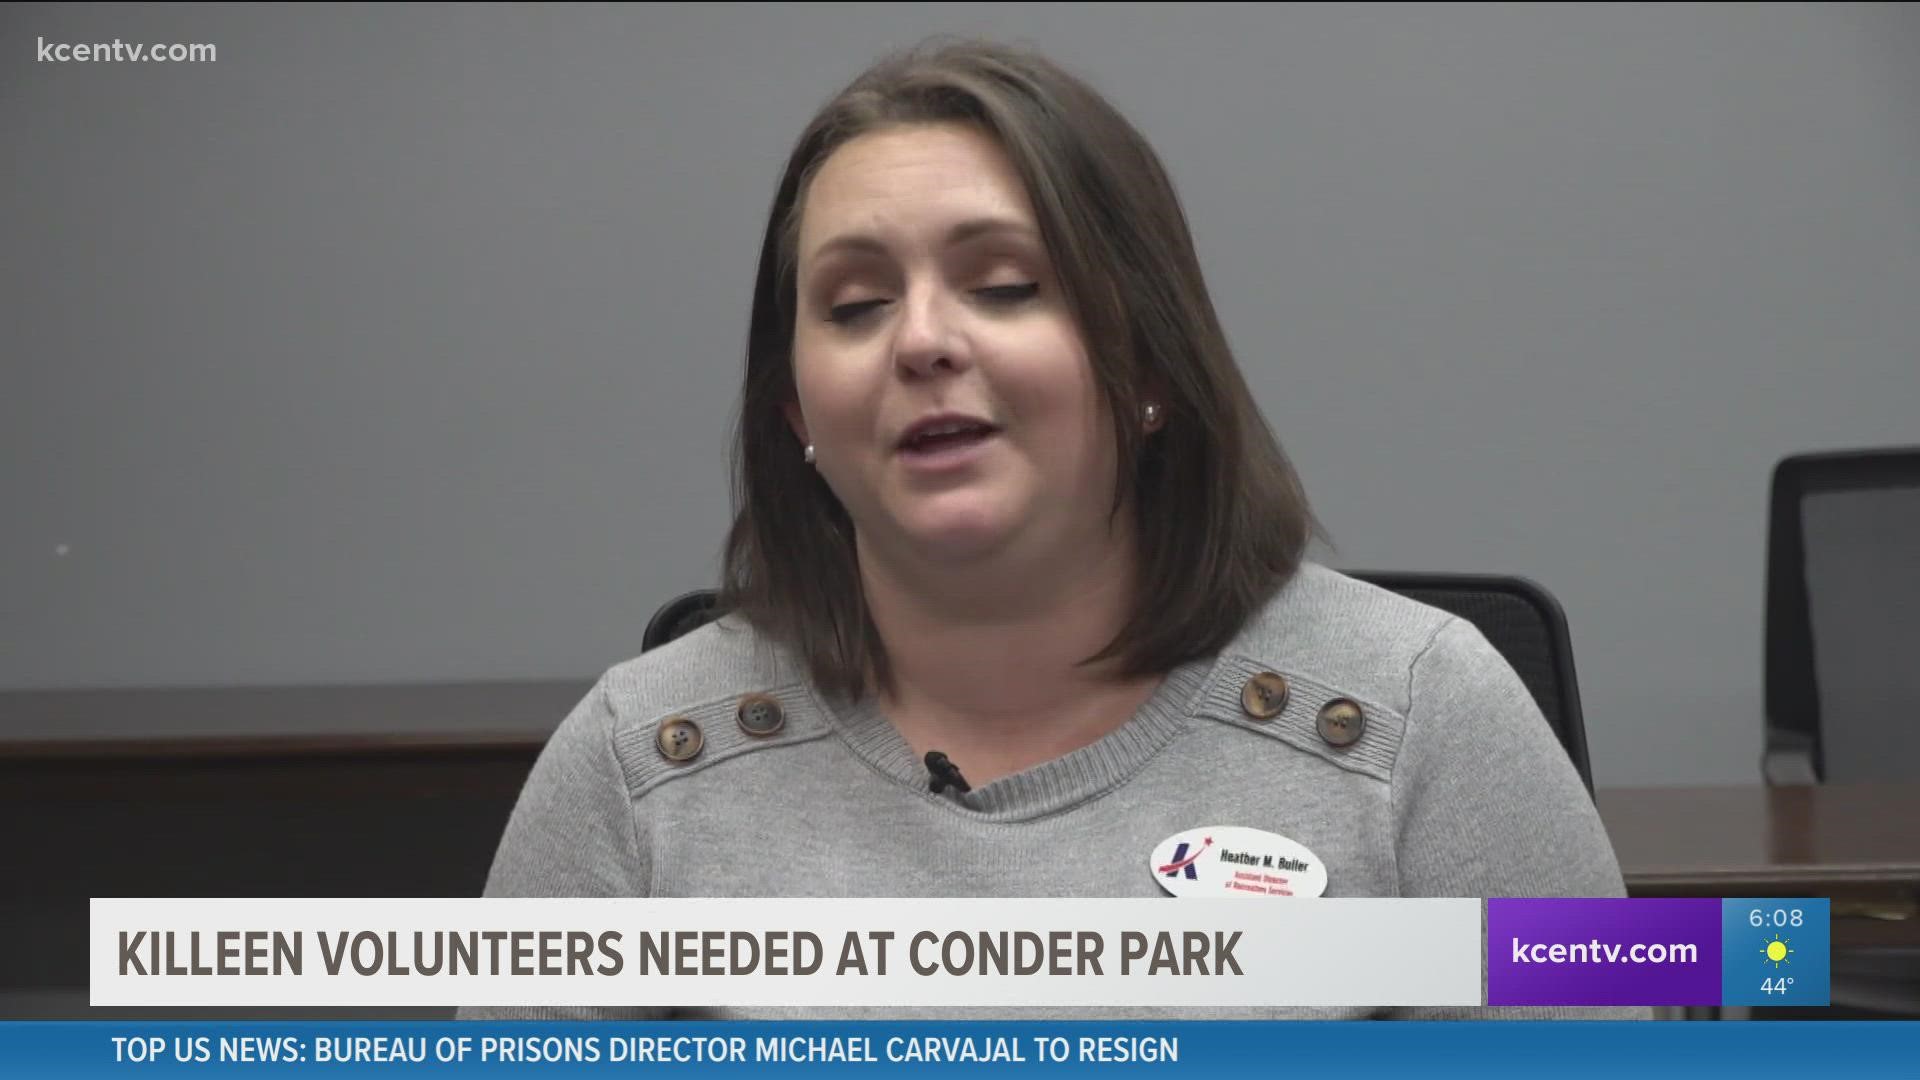 Killeen's Conder Park is in need of some lovin' for Love Your Park Day. The city is looking for volunteers for park restoration.